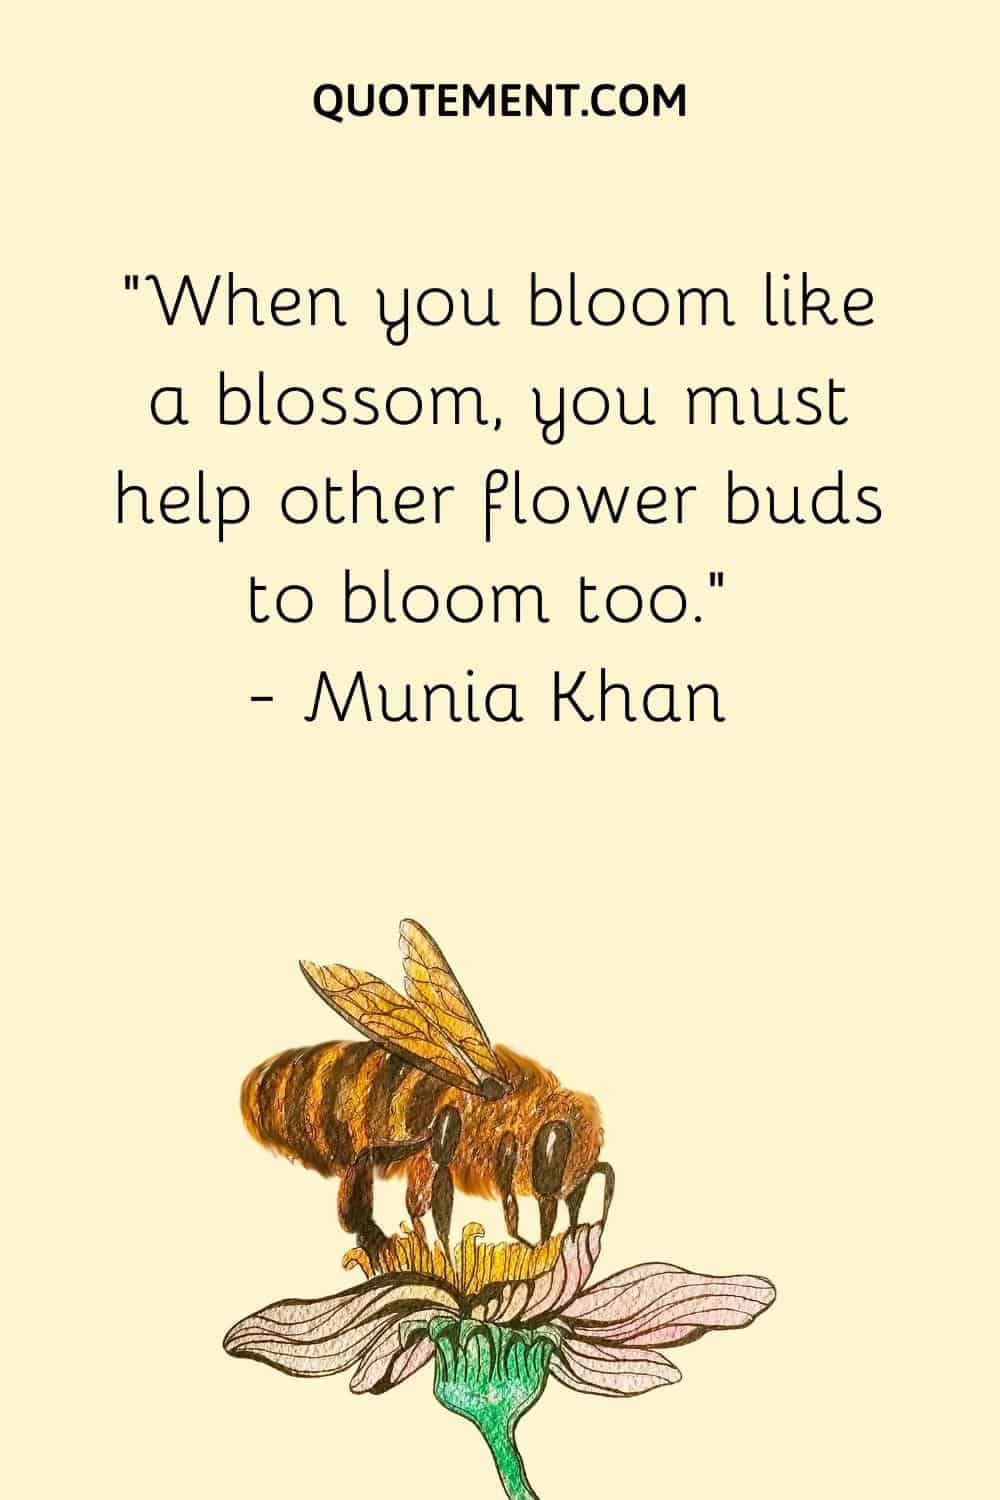 “When you bloom like a blossom, you must help other flower buds to bloom too.” ― Munia Khan